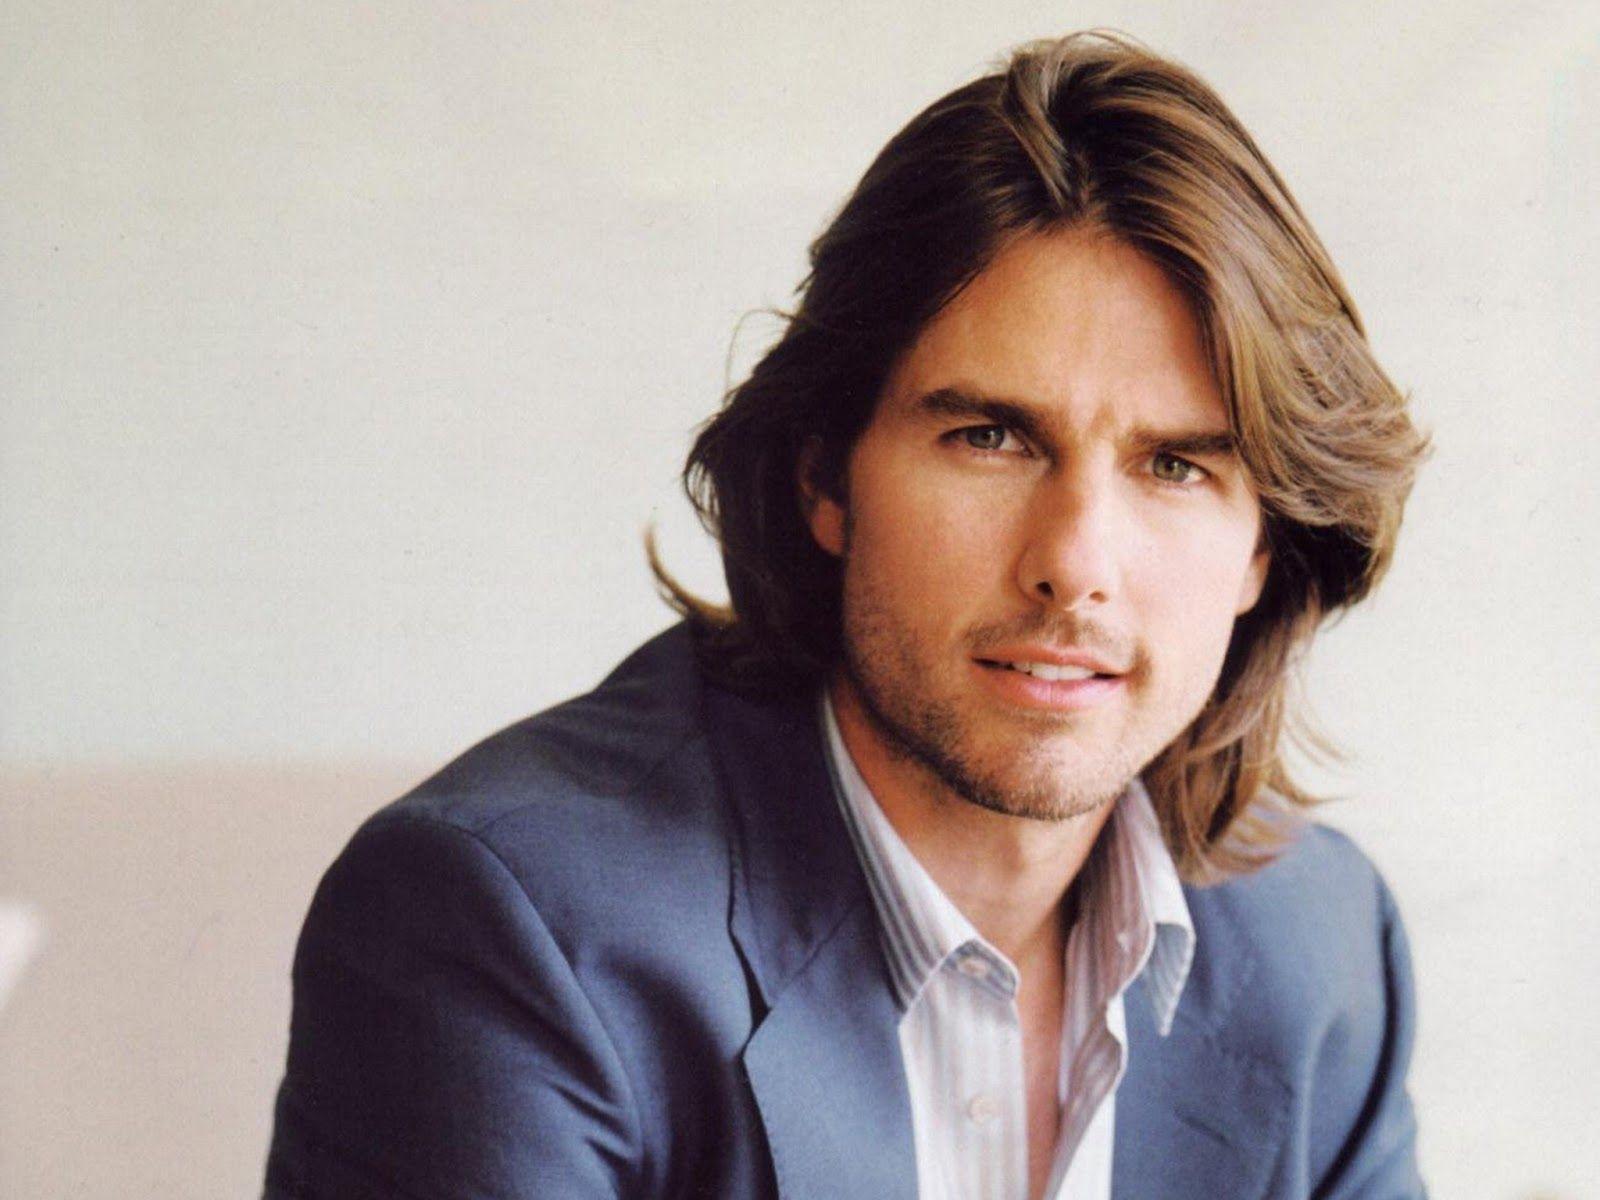 tom cruise pic download